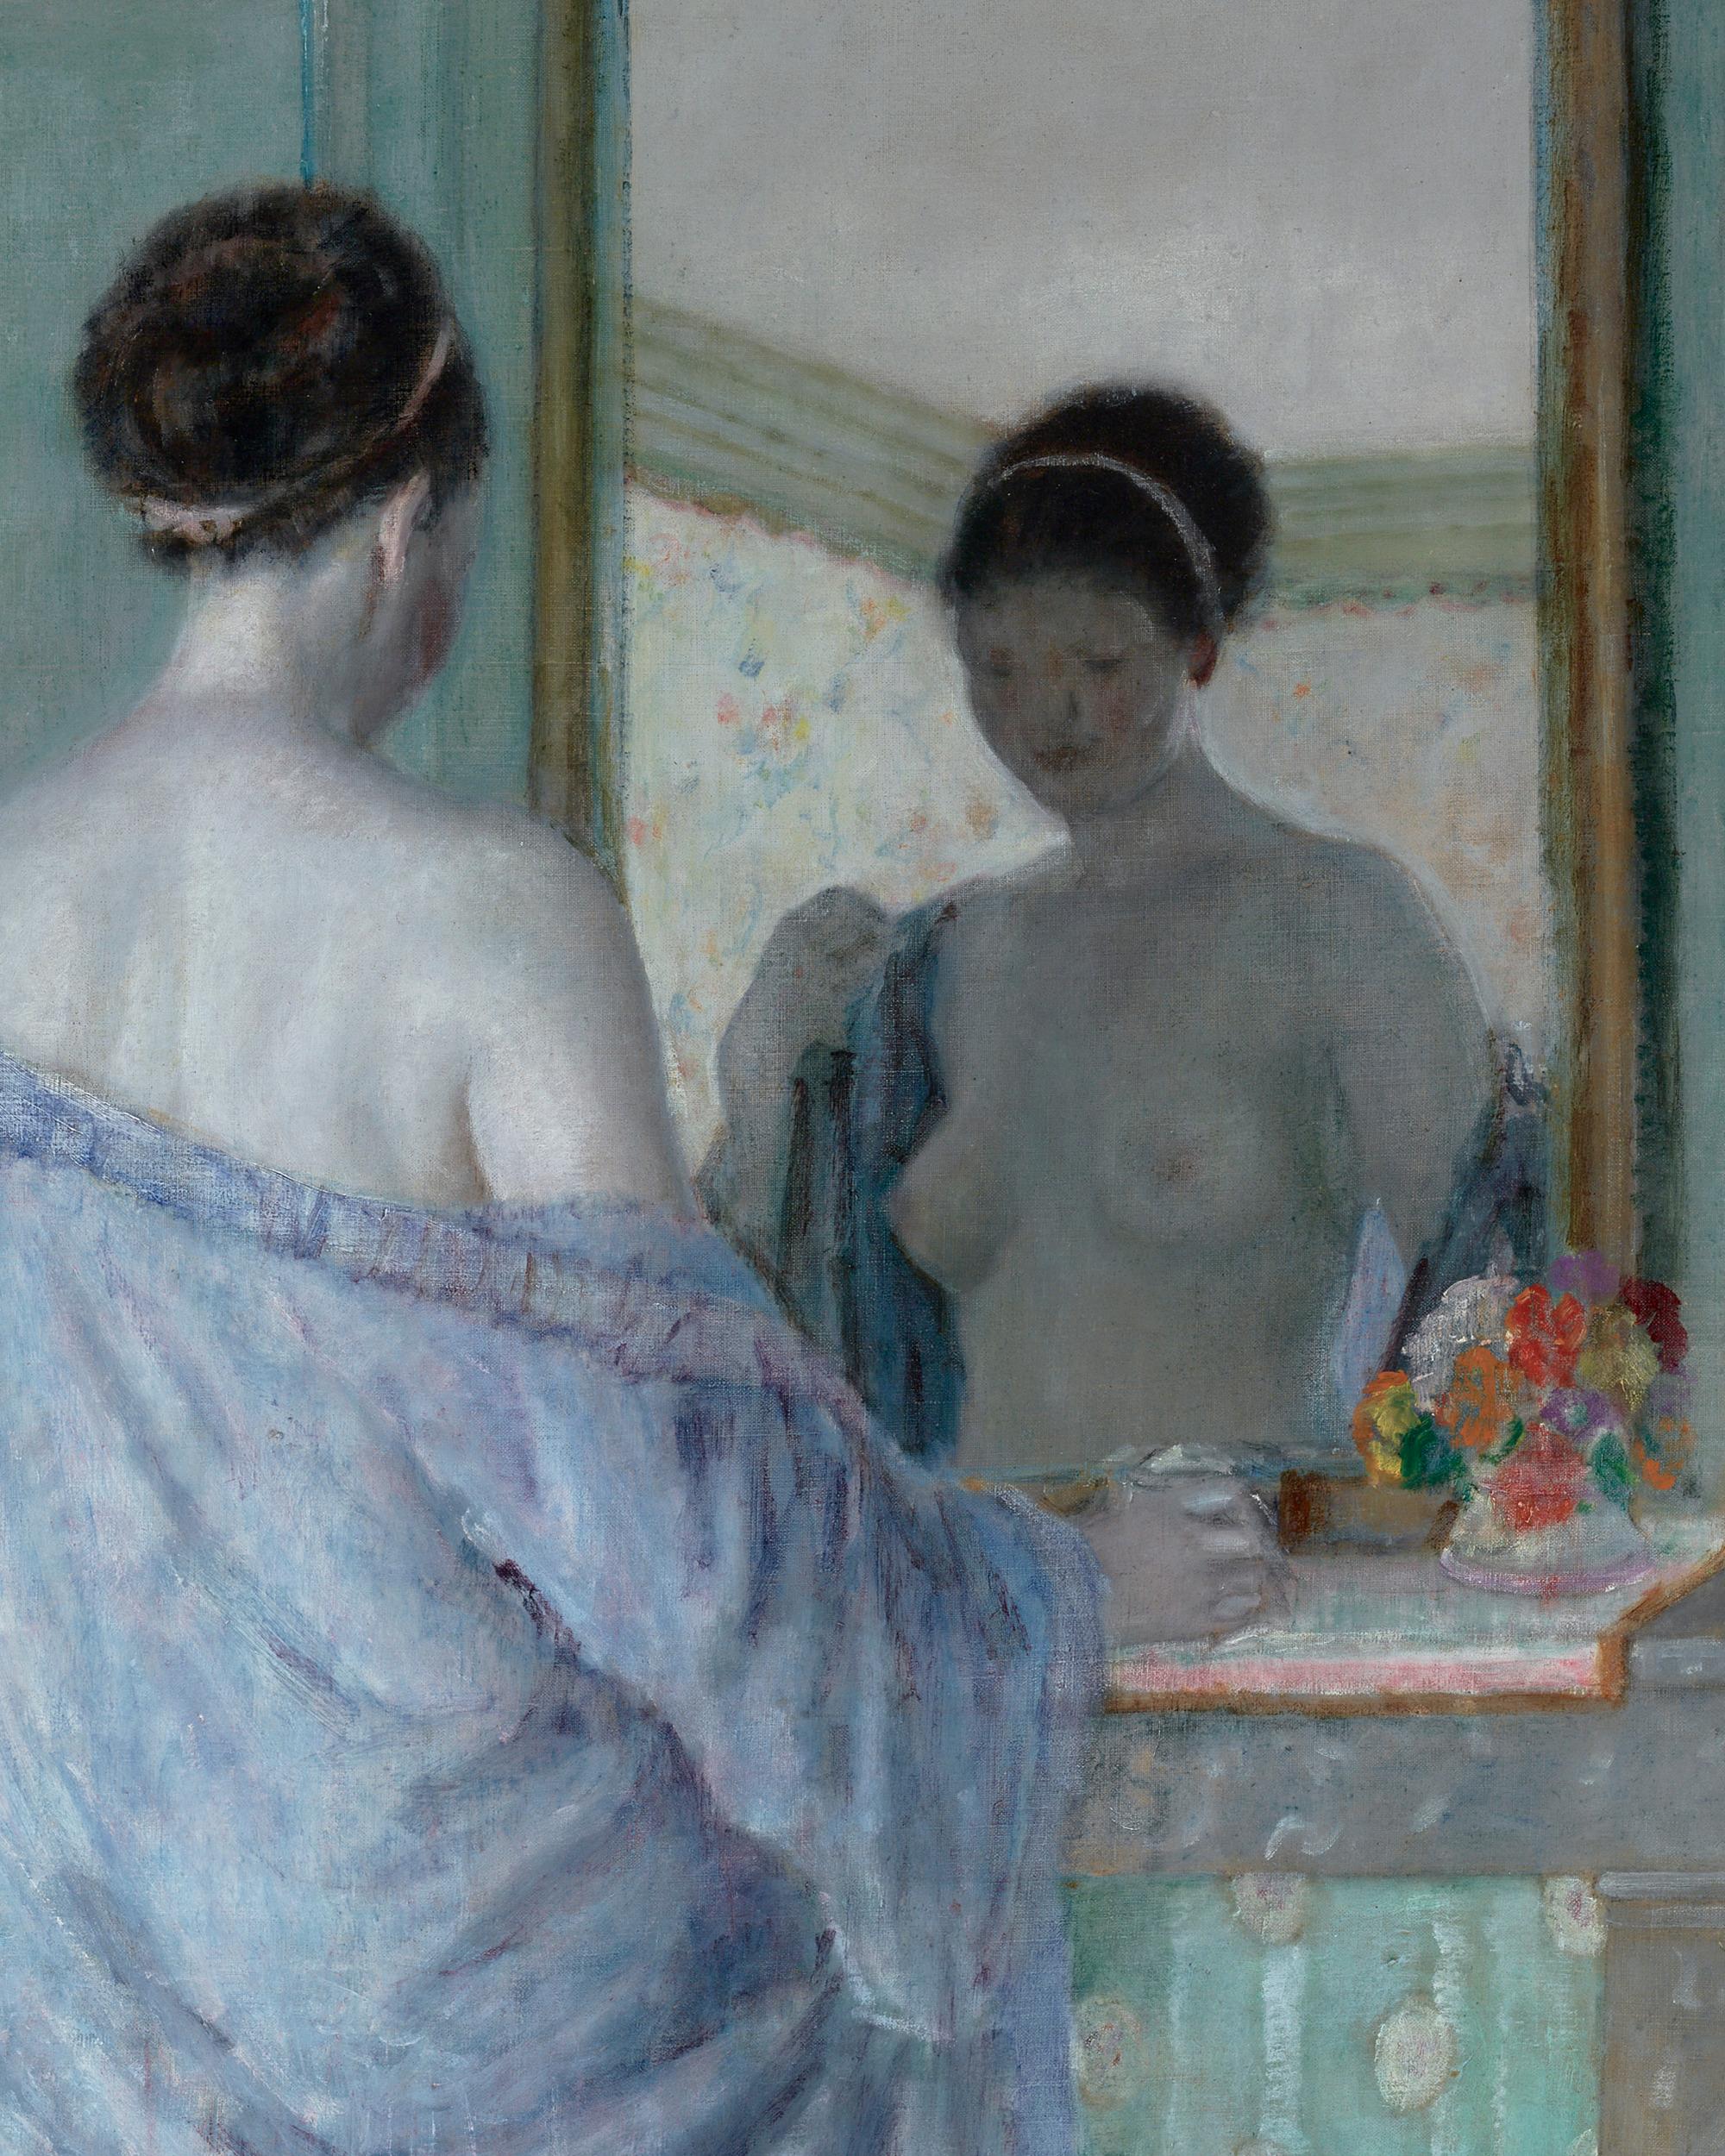 At the Mirror - Impressionist Painting by Frederick Carl Frieseke